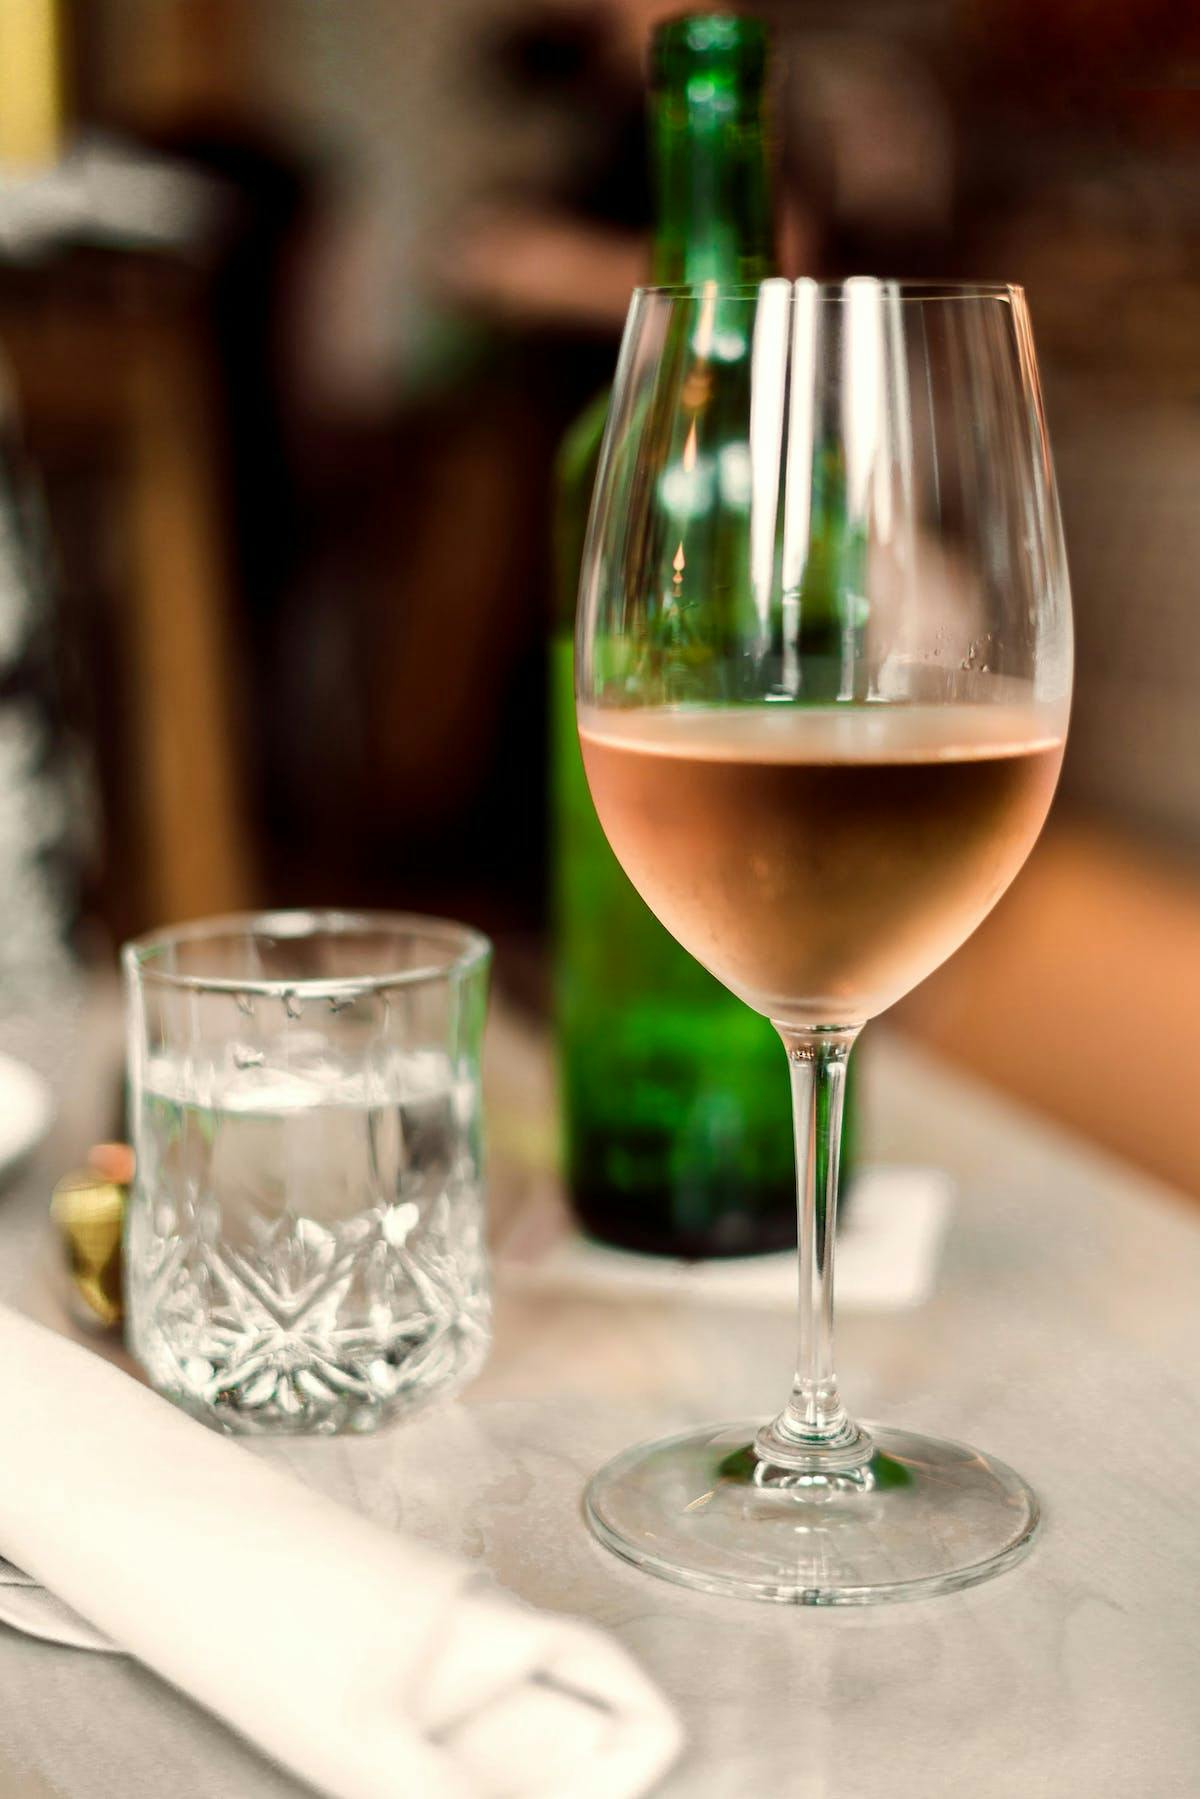 a close up of a wine glass sitting on a table